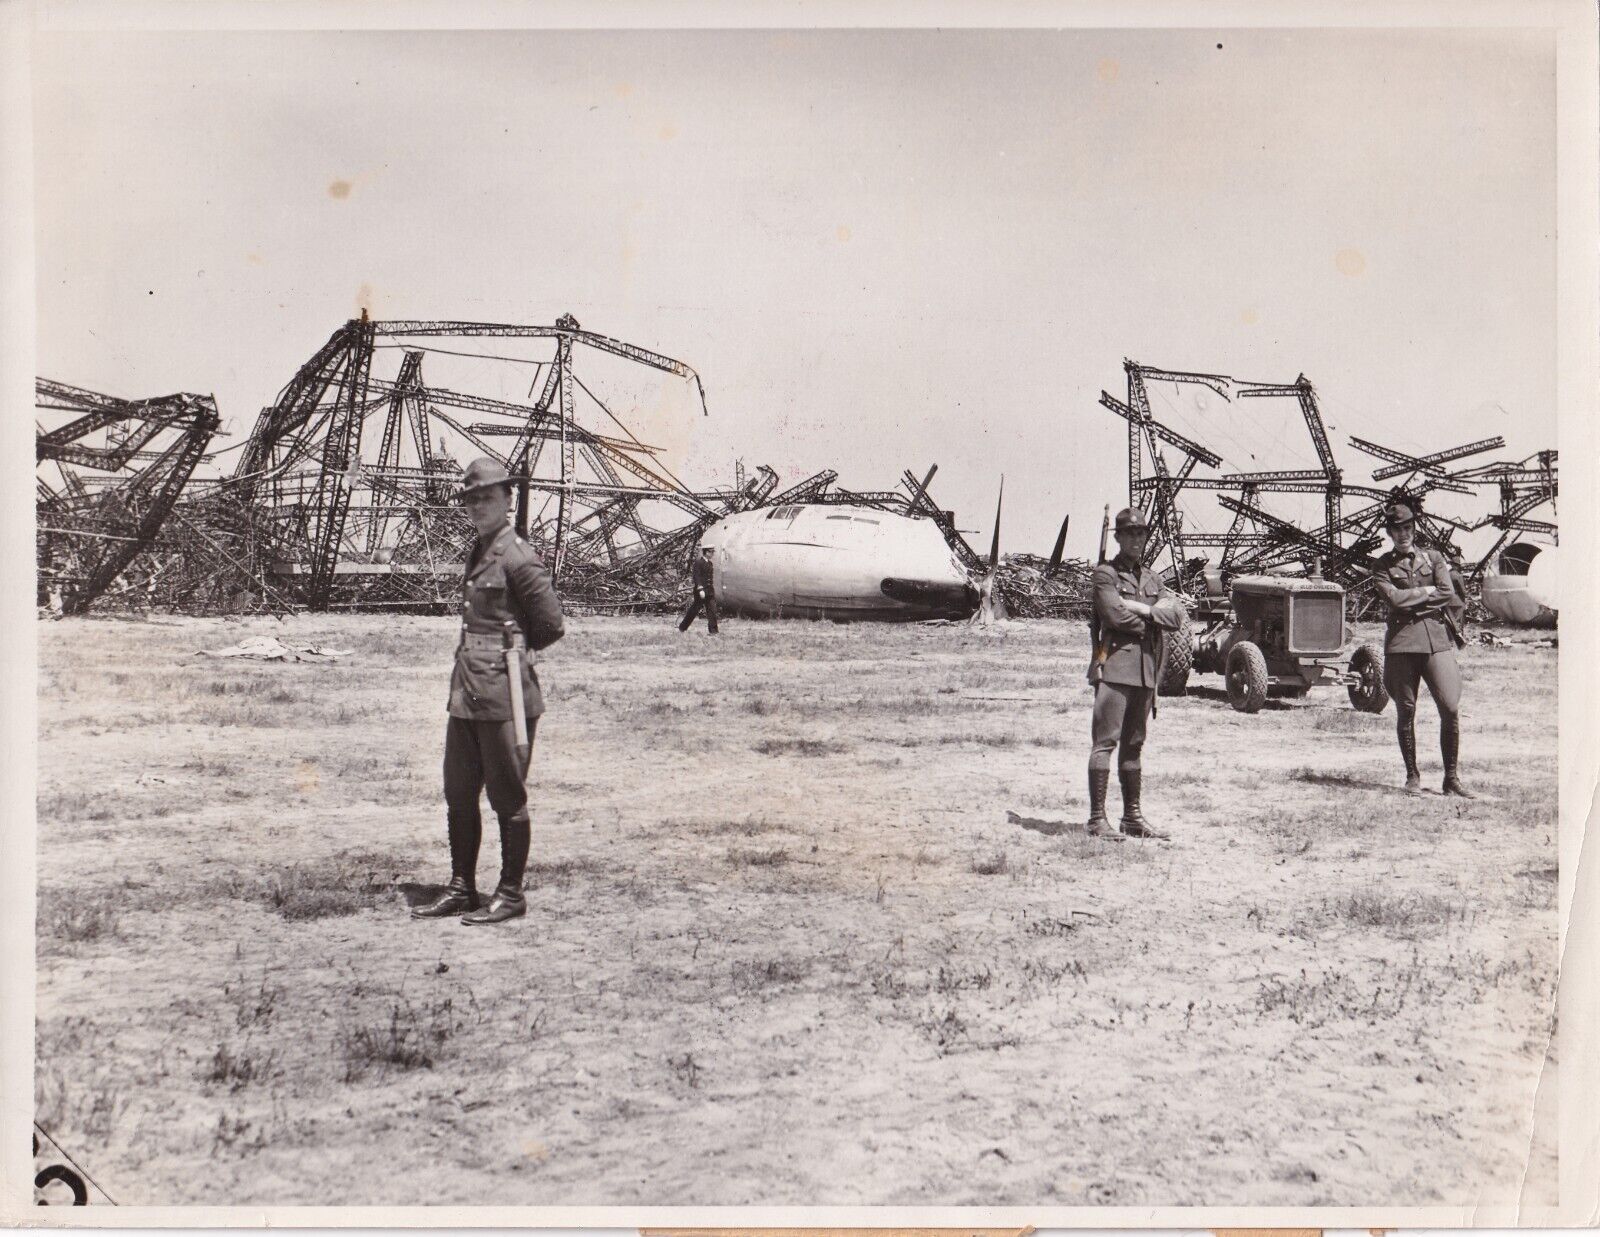 1937 A view of the wrecked Hindenburg Zeppelin Airship in Lakehurst - RARE L206C